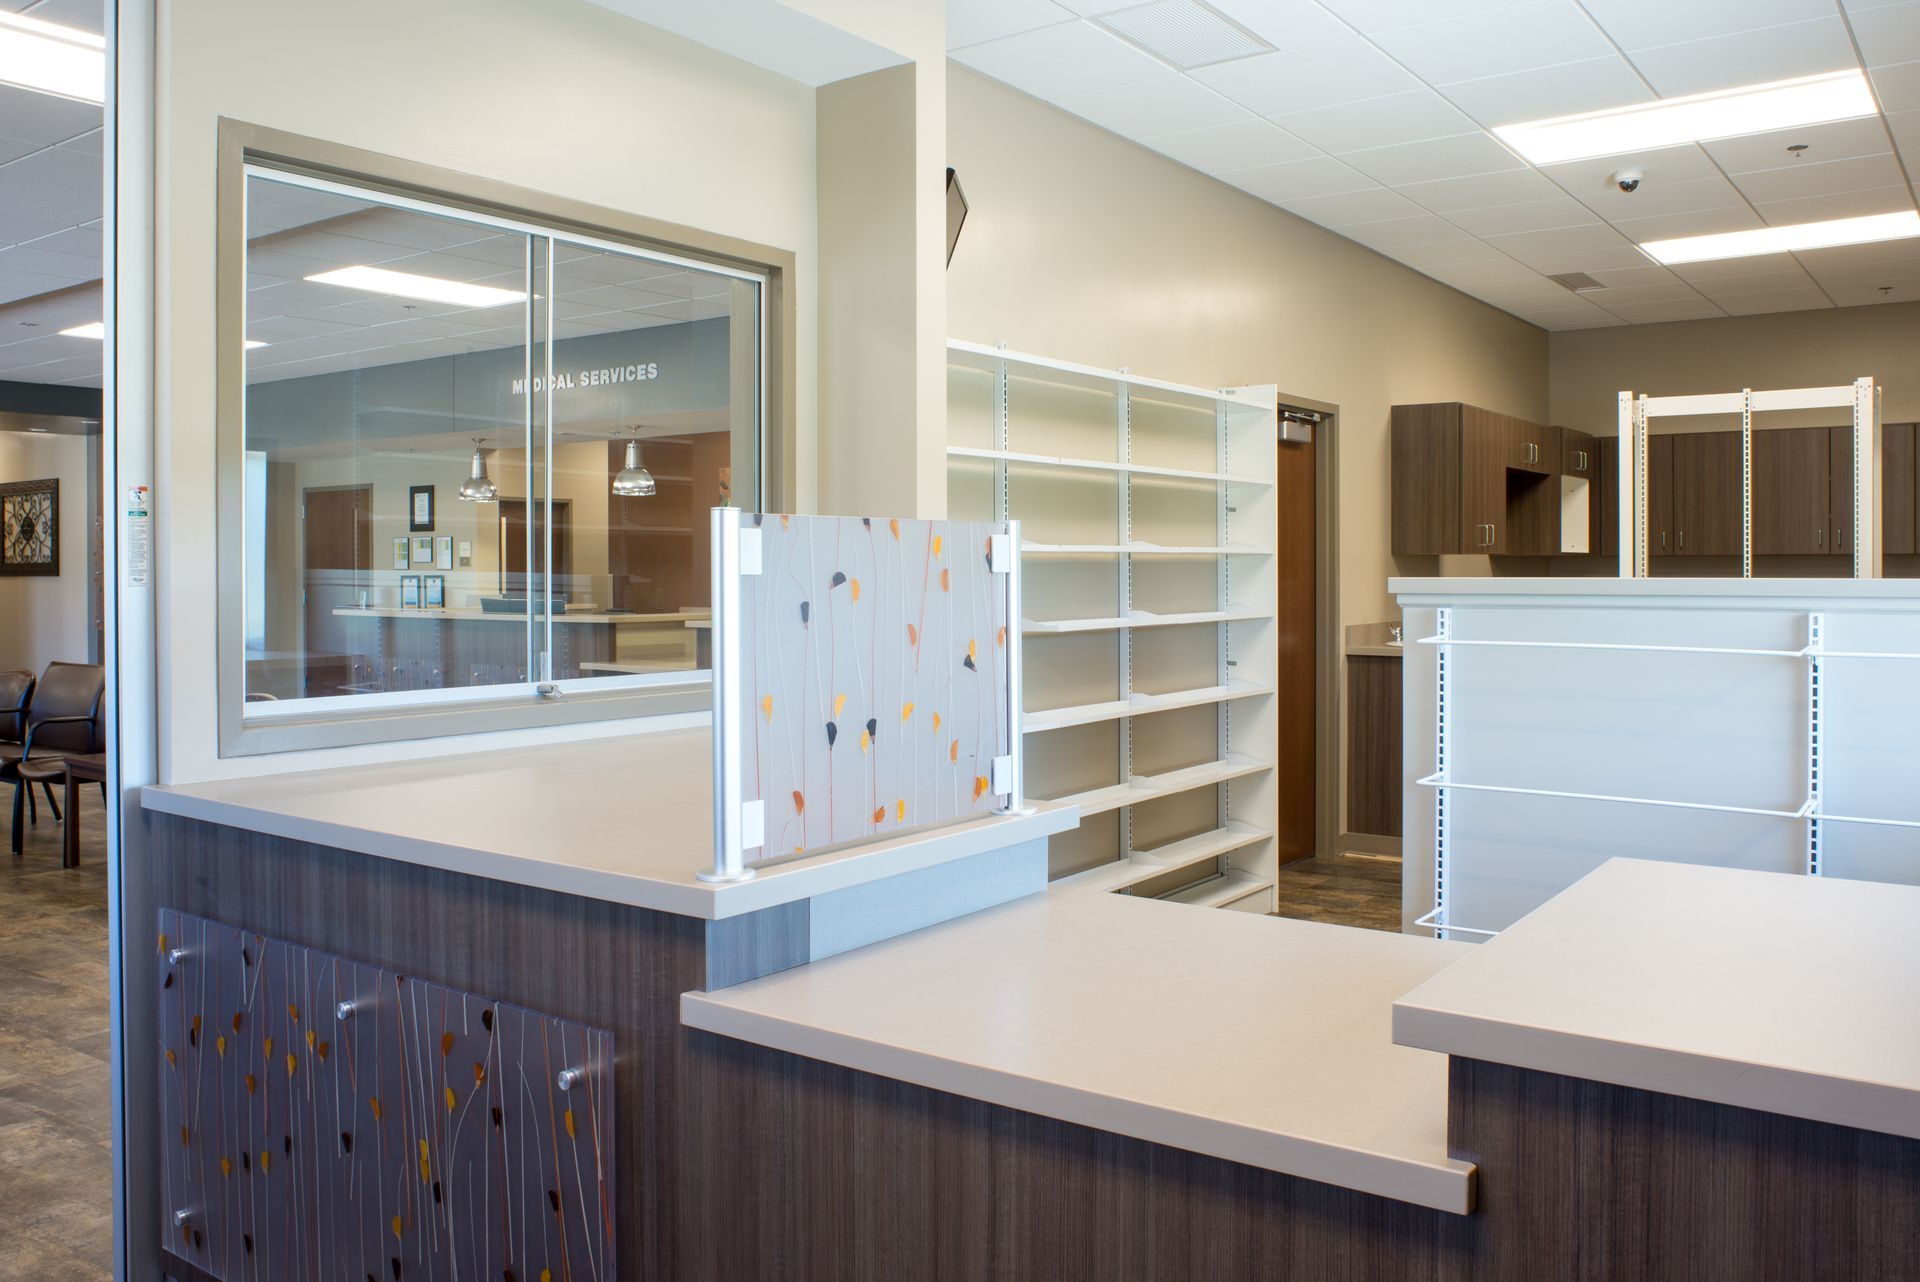 Design & Build Your Commercial Office With Professional Contractors & Engineers in Fulton, MO.